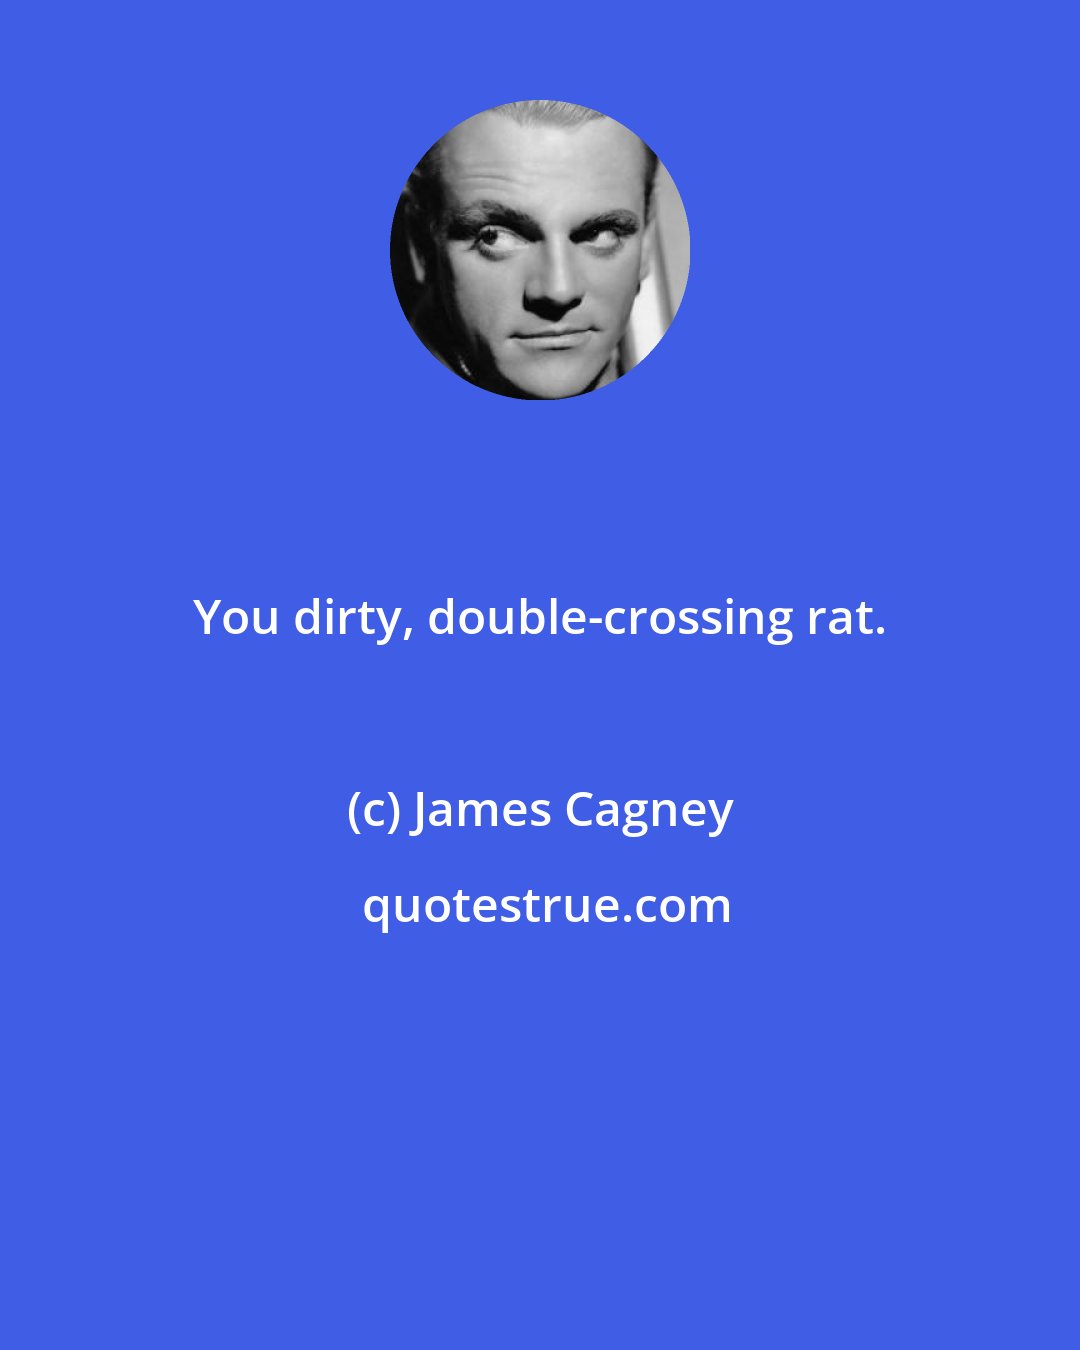 James Cagney: You dirty, double-crossing rat.